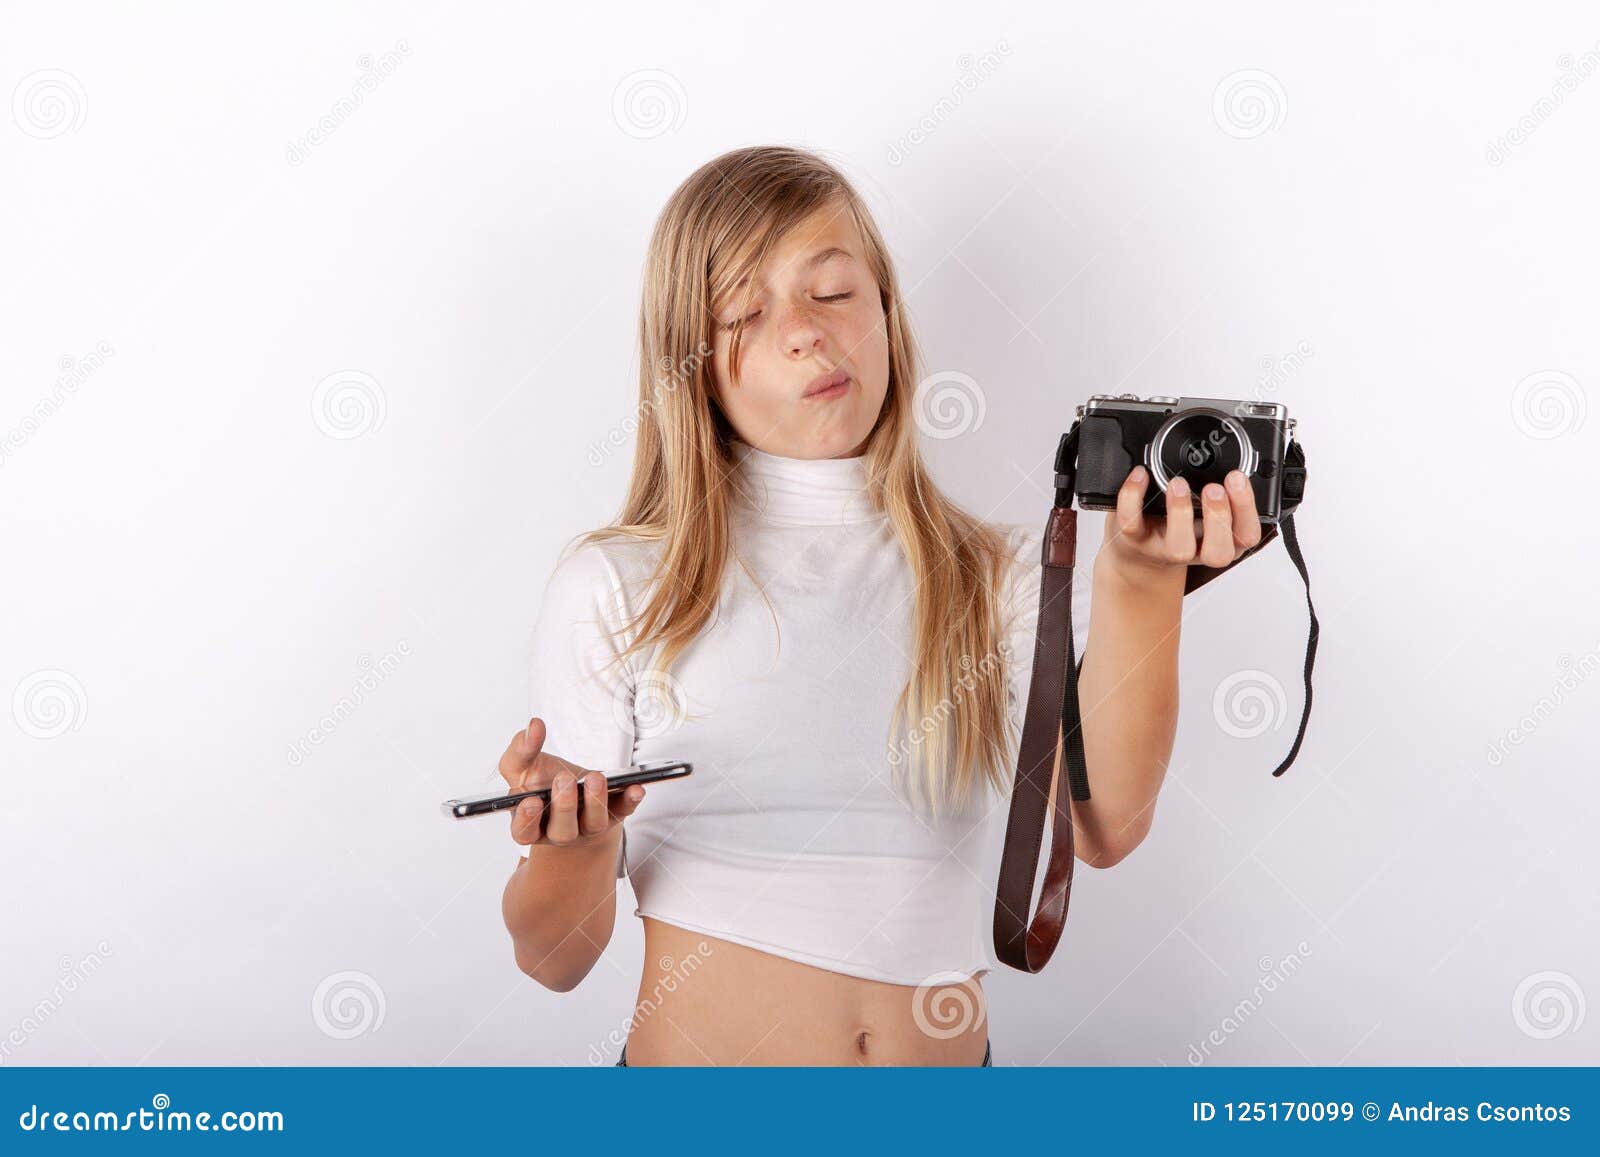 teen girl cant choose between smartphone and compact camera